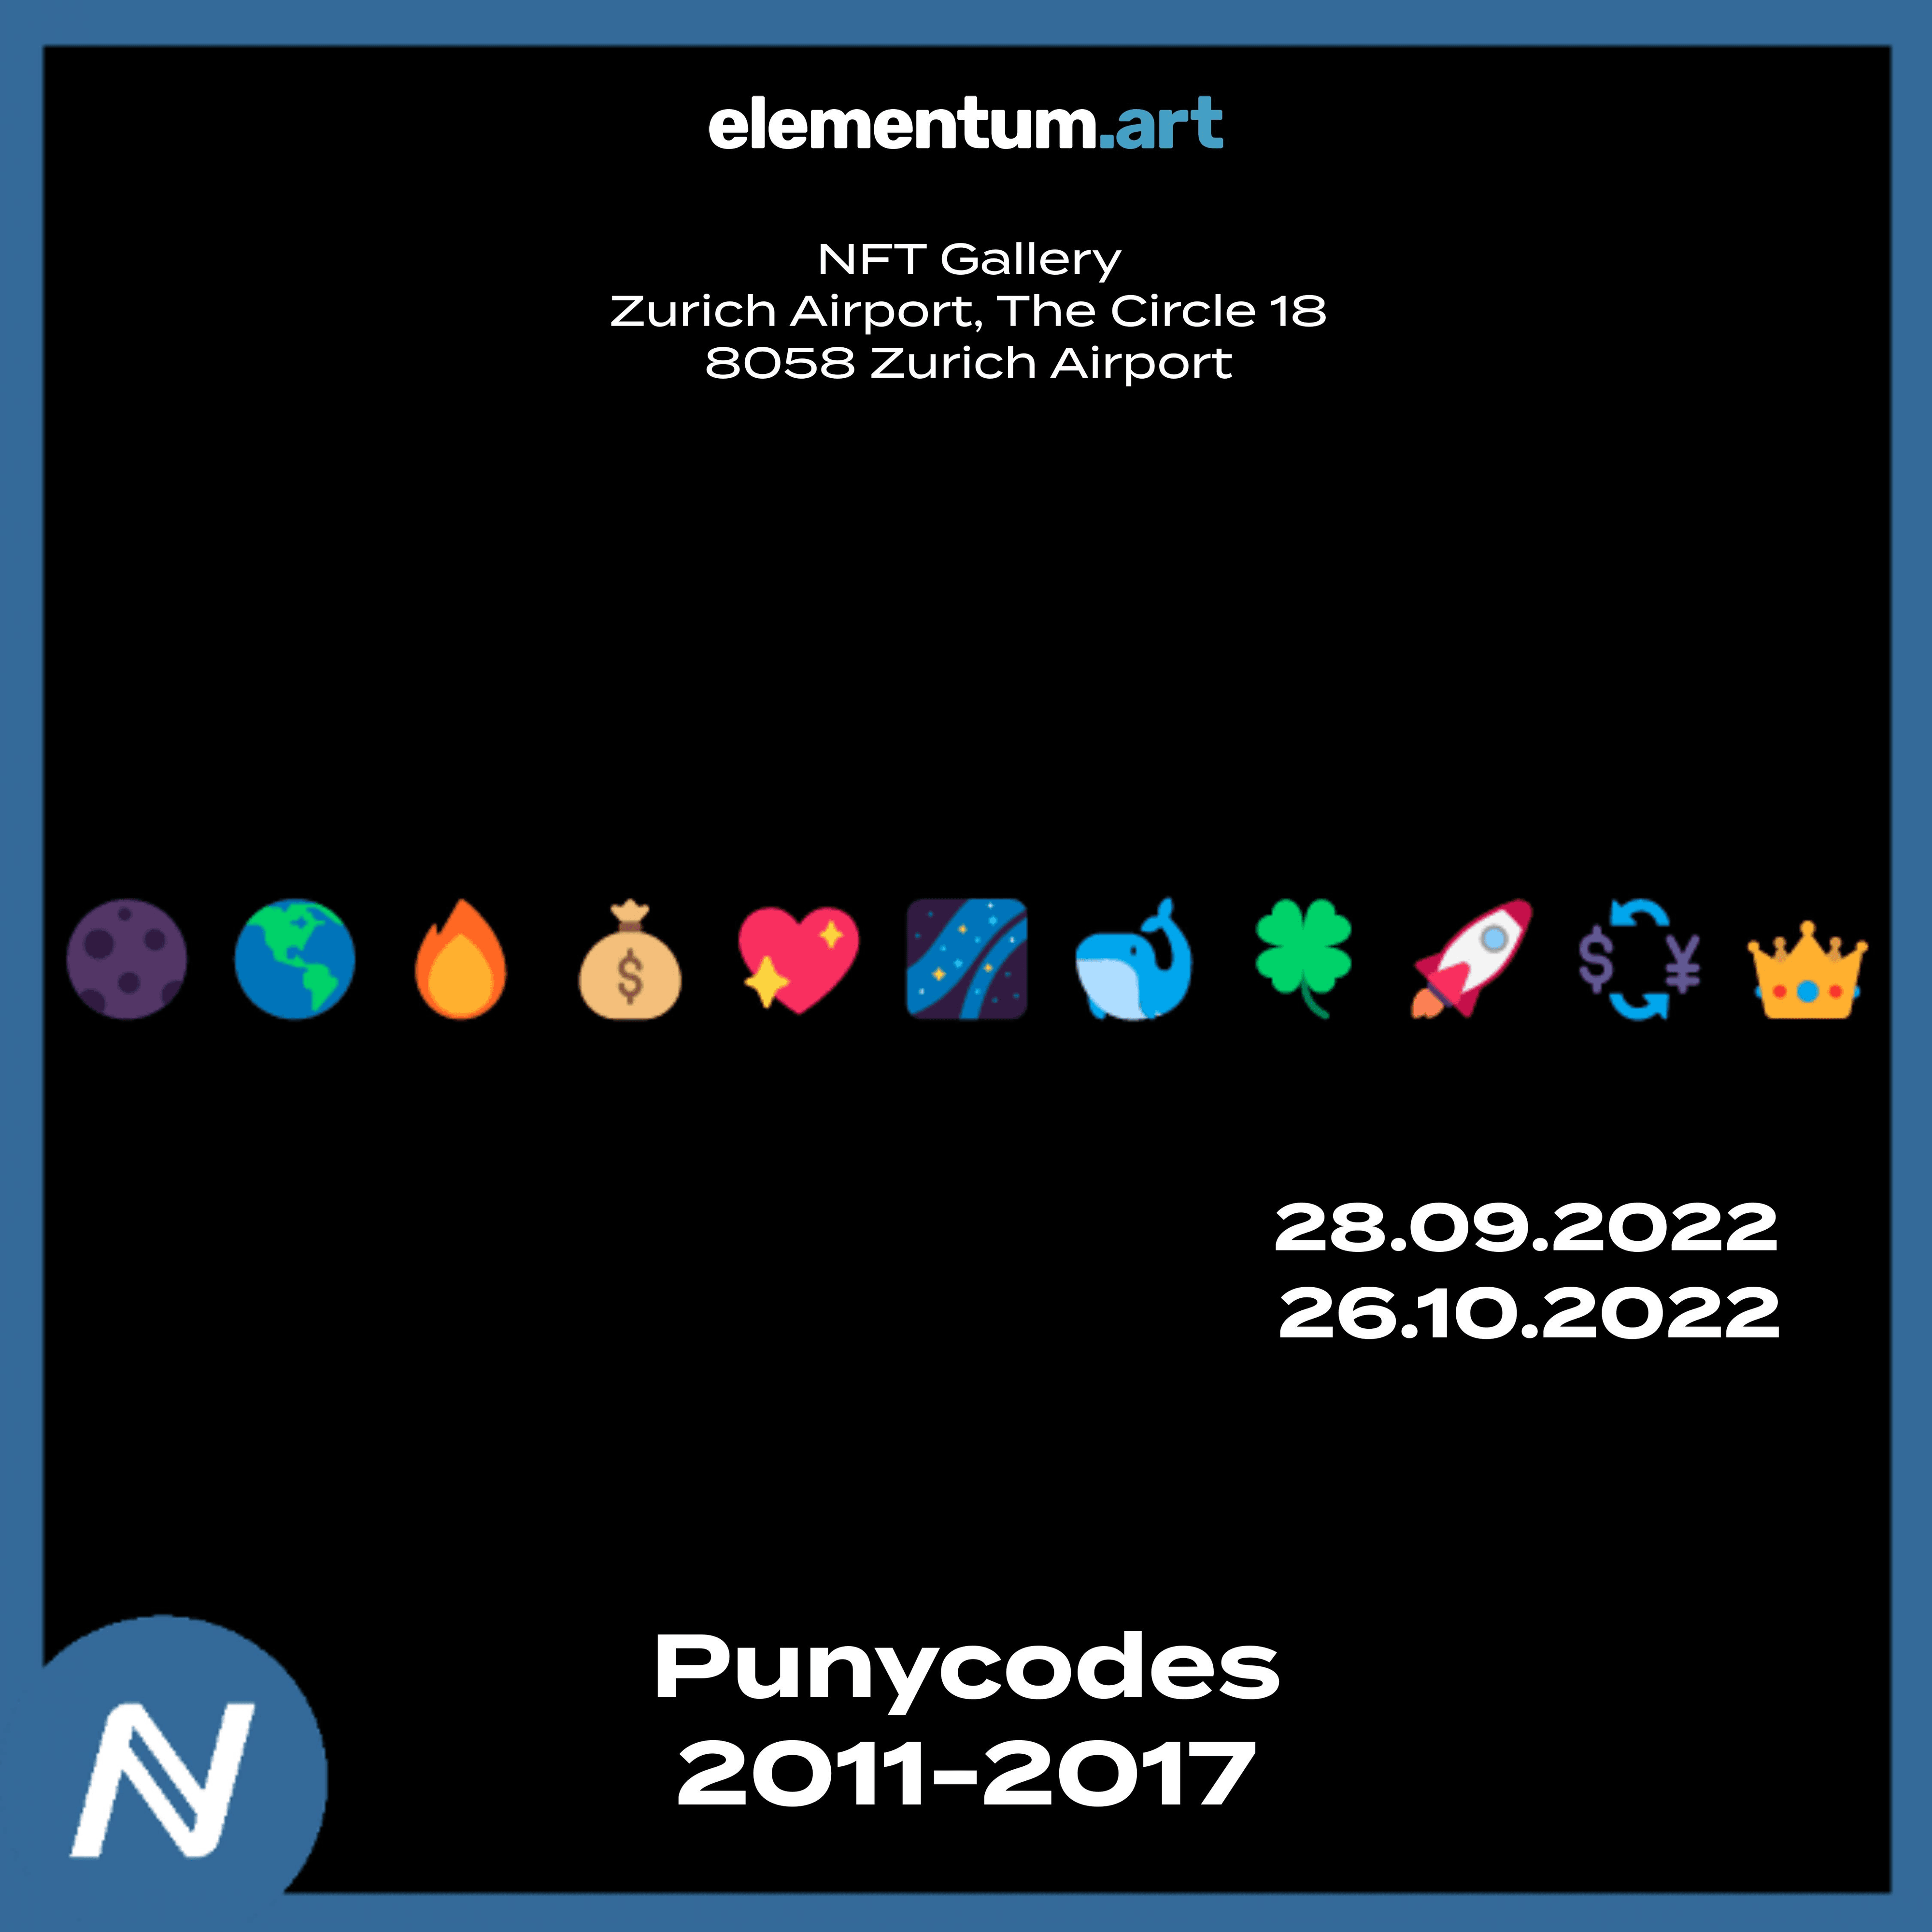 Punycodes Exhibition